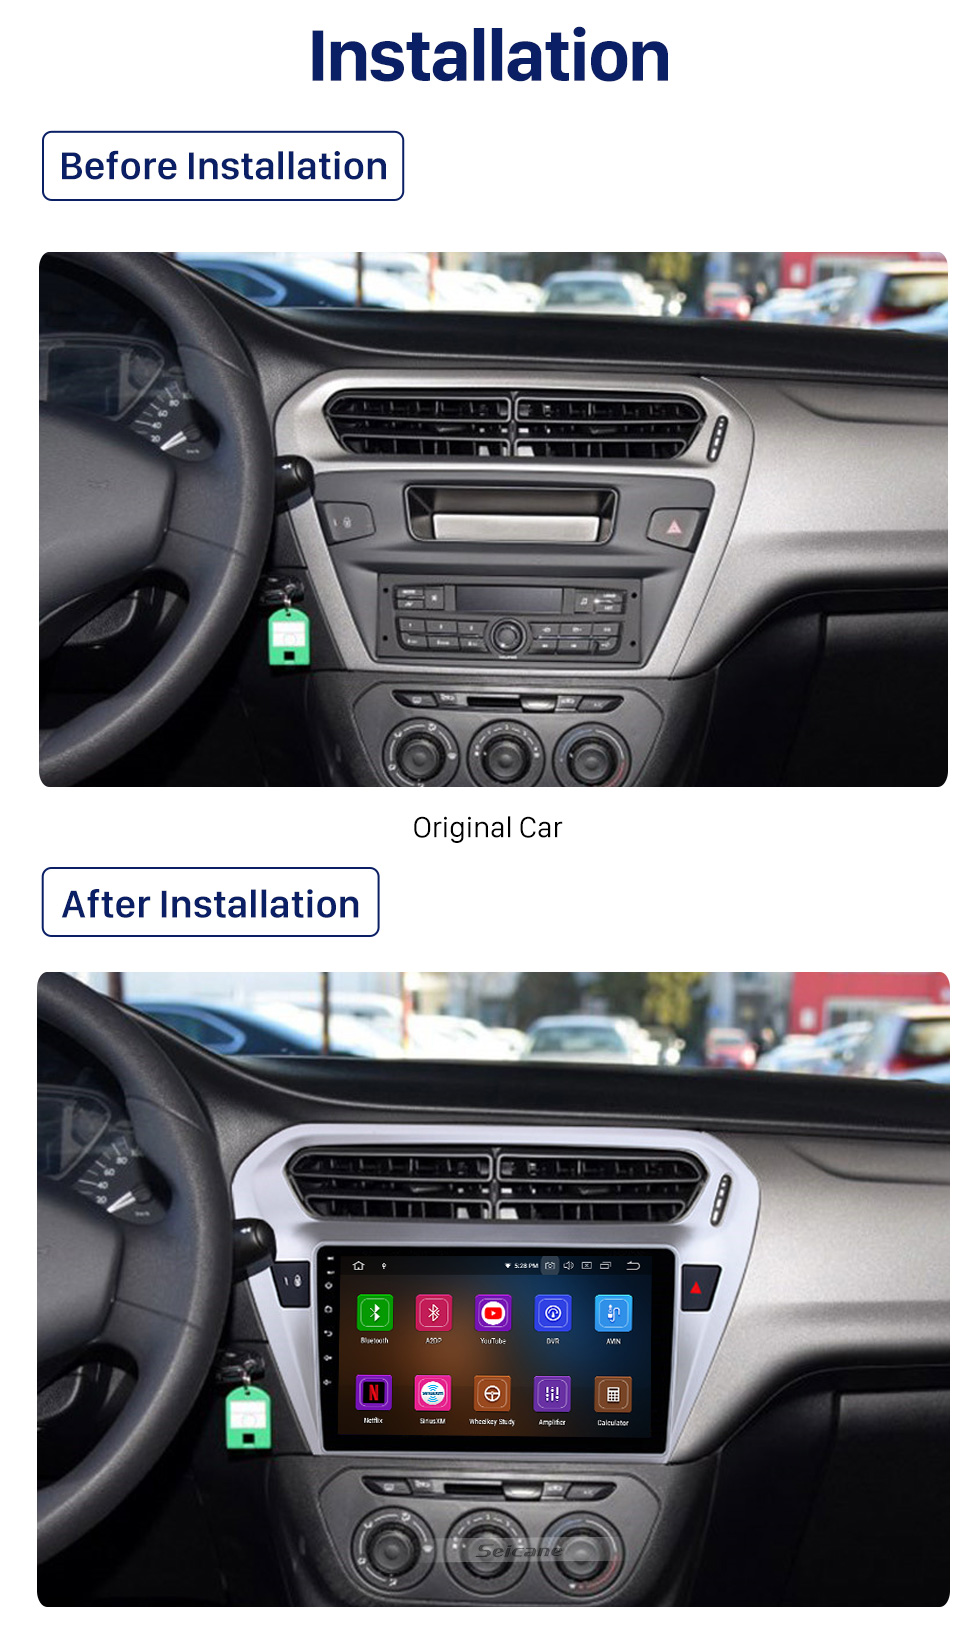 Seicane 9 inch 2013 2014 Peugeot 301 Citroen Elysee C-Elysee Android 10.0 Radio GPS HD 1024*600 Touchscreen 4G WIFI Steering Wheel OBD2 RDS Control Bluetooth